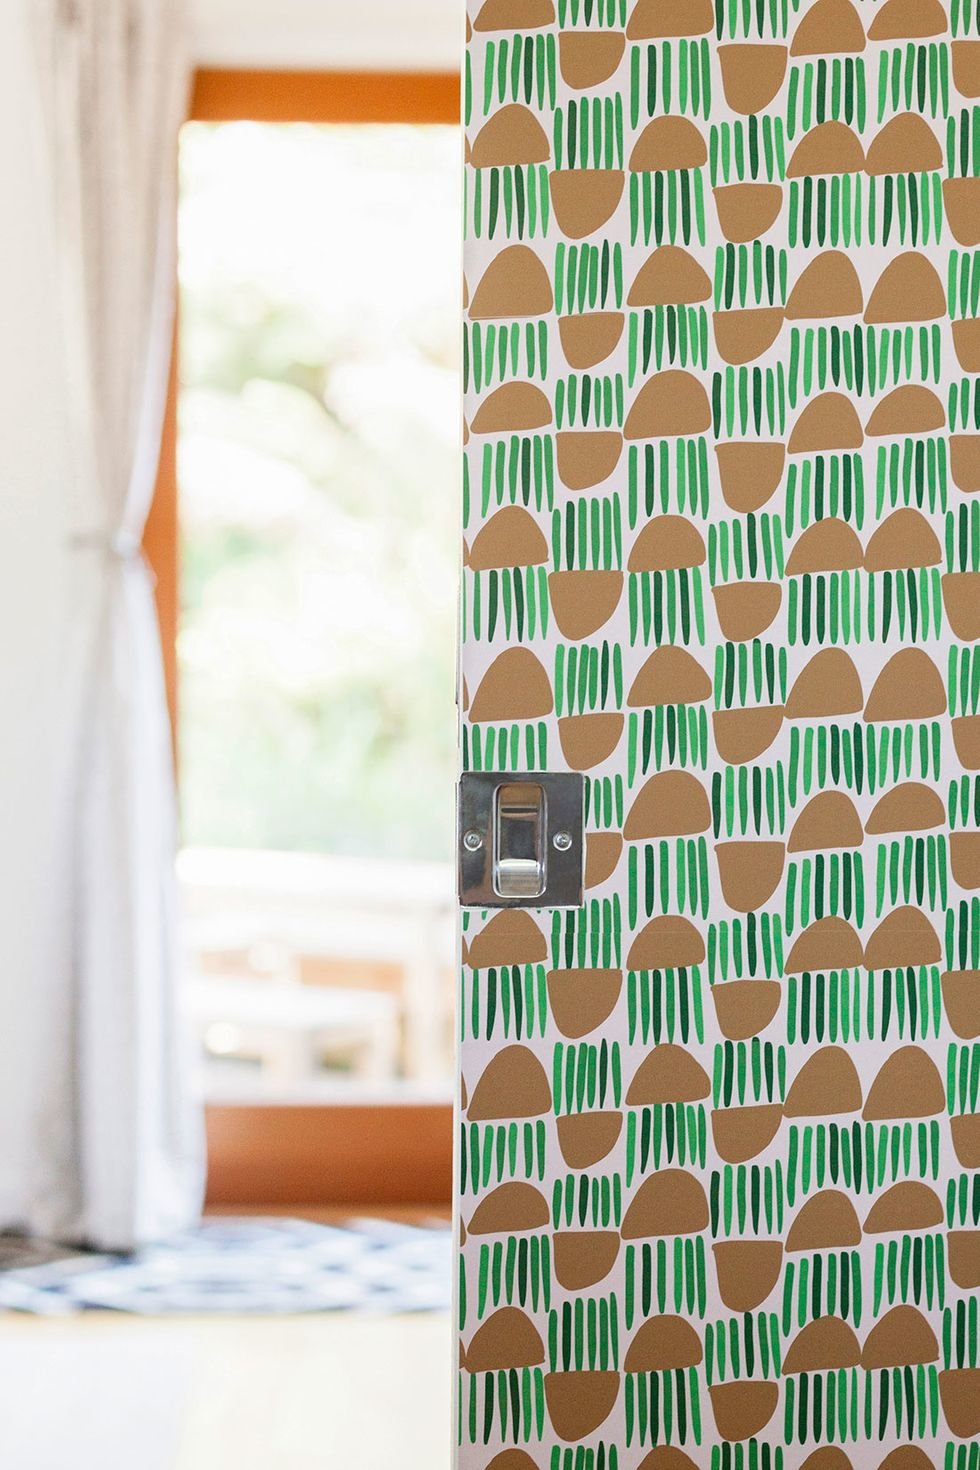 Make It Over: Pocket Doors with a Wallpaper Pattern Pop